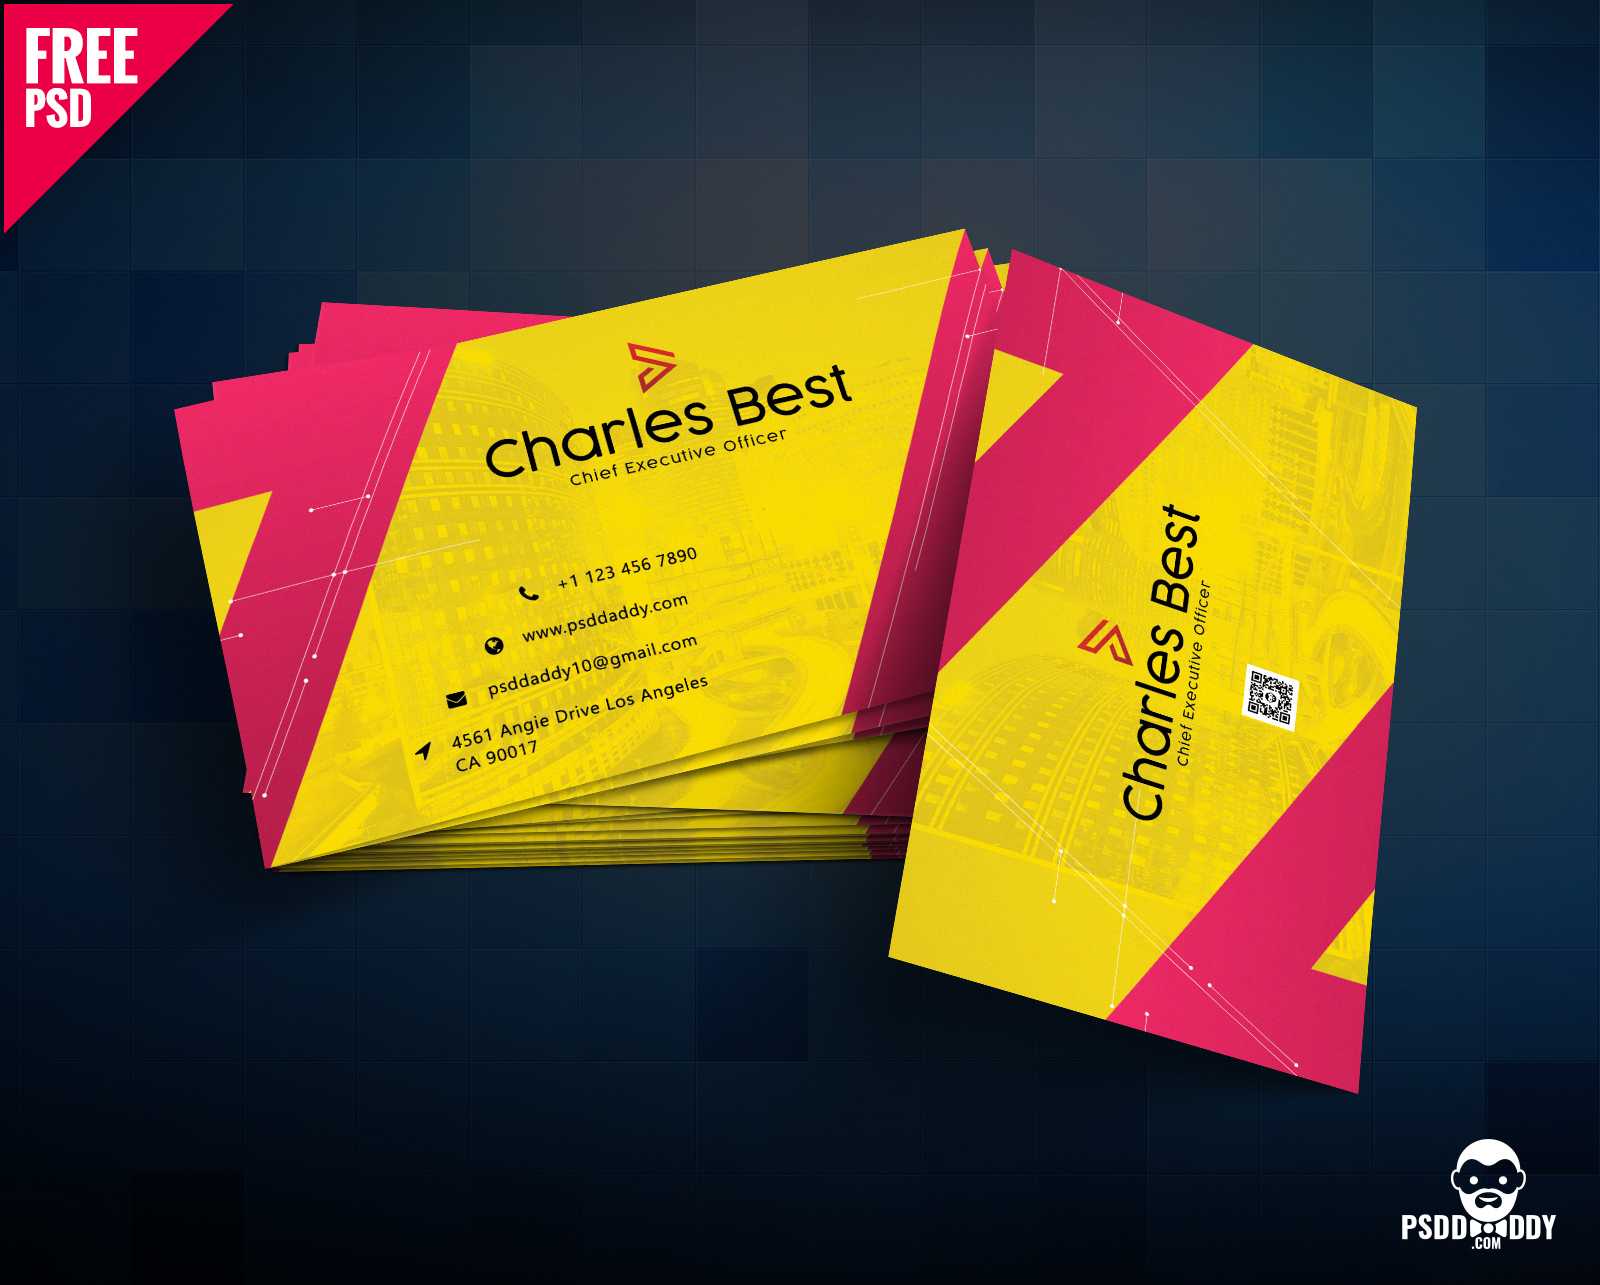 Download] Creative Business Card Free Psd | Psddaddy Intended For Unique Business Card Templates Free